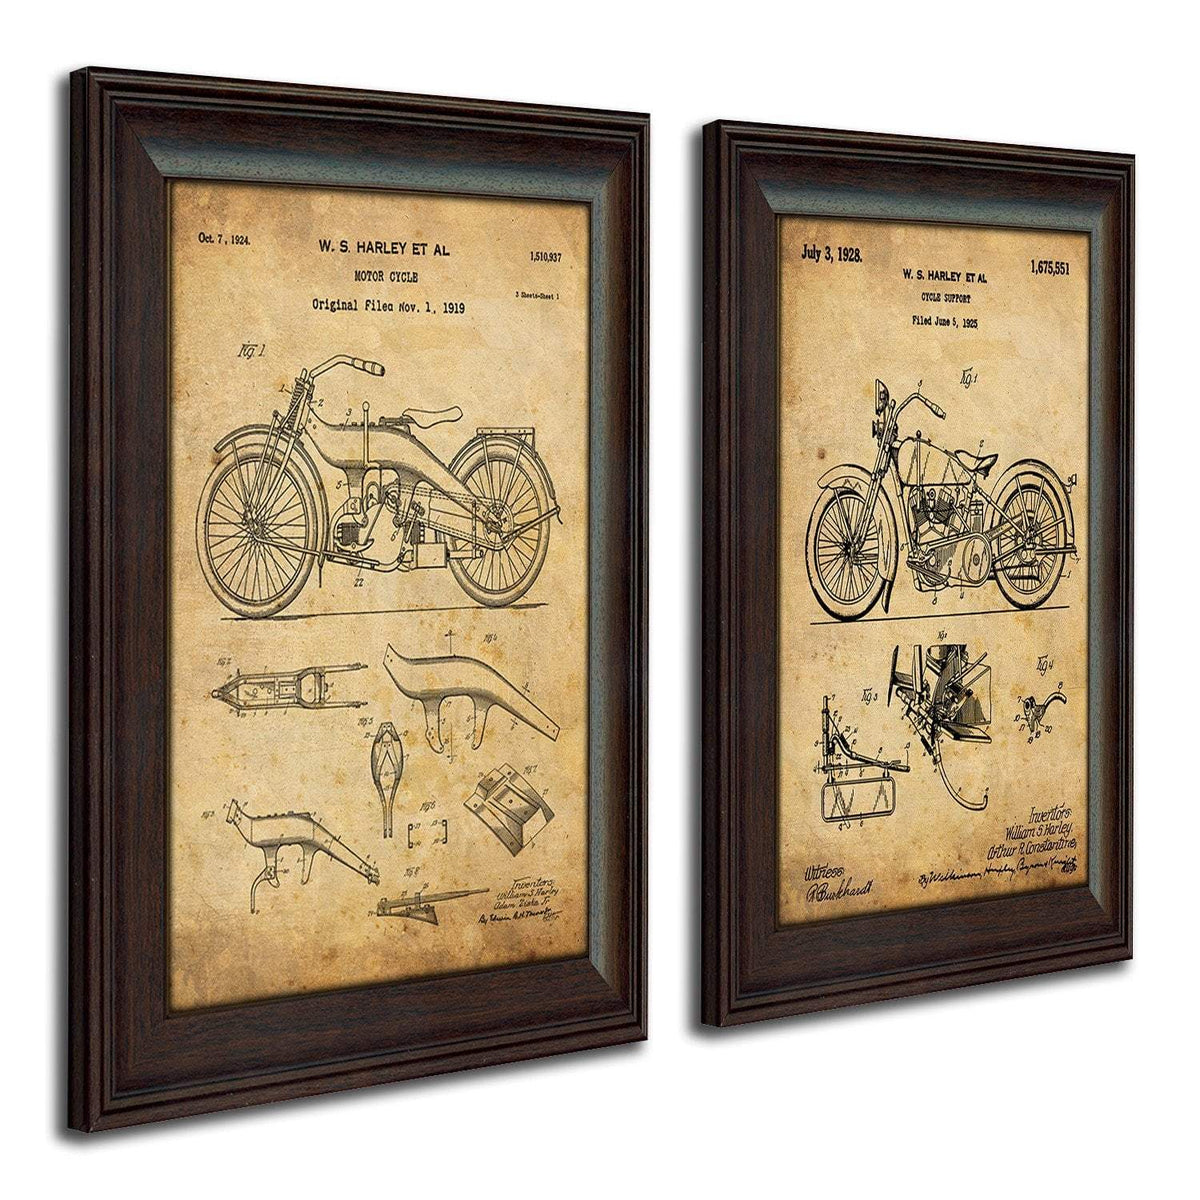 US Patent drawing framed prints - 1919 and 1925 Harley Davidson Bikes from Personal Prints